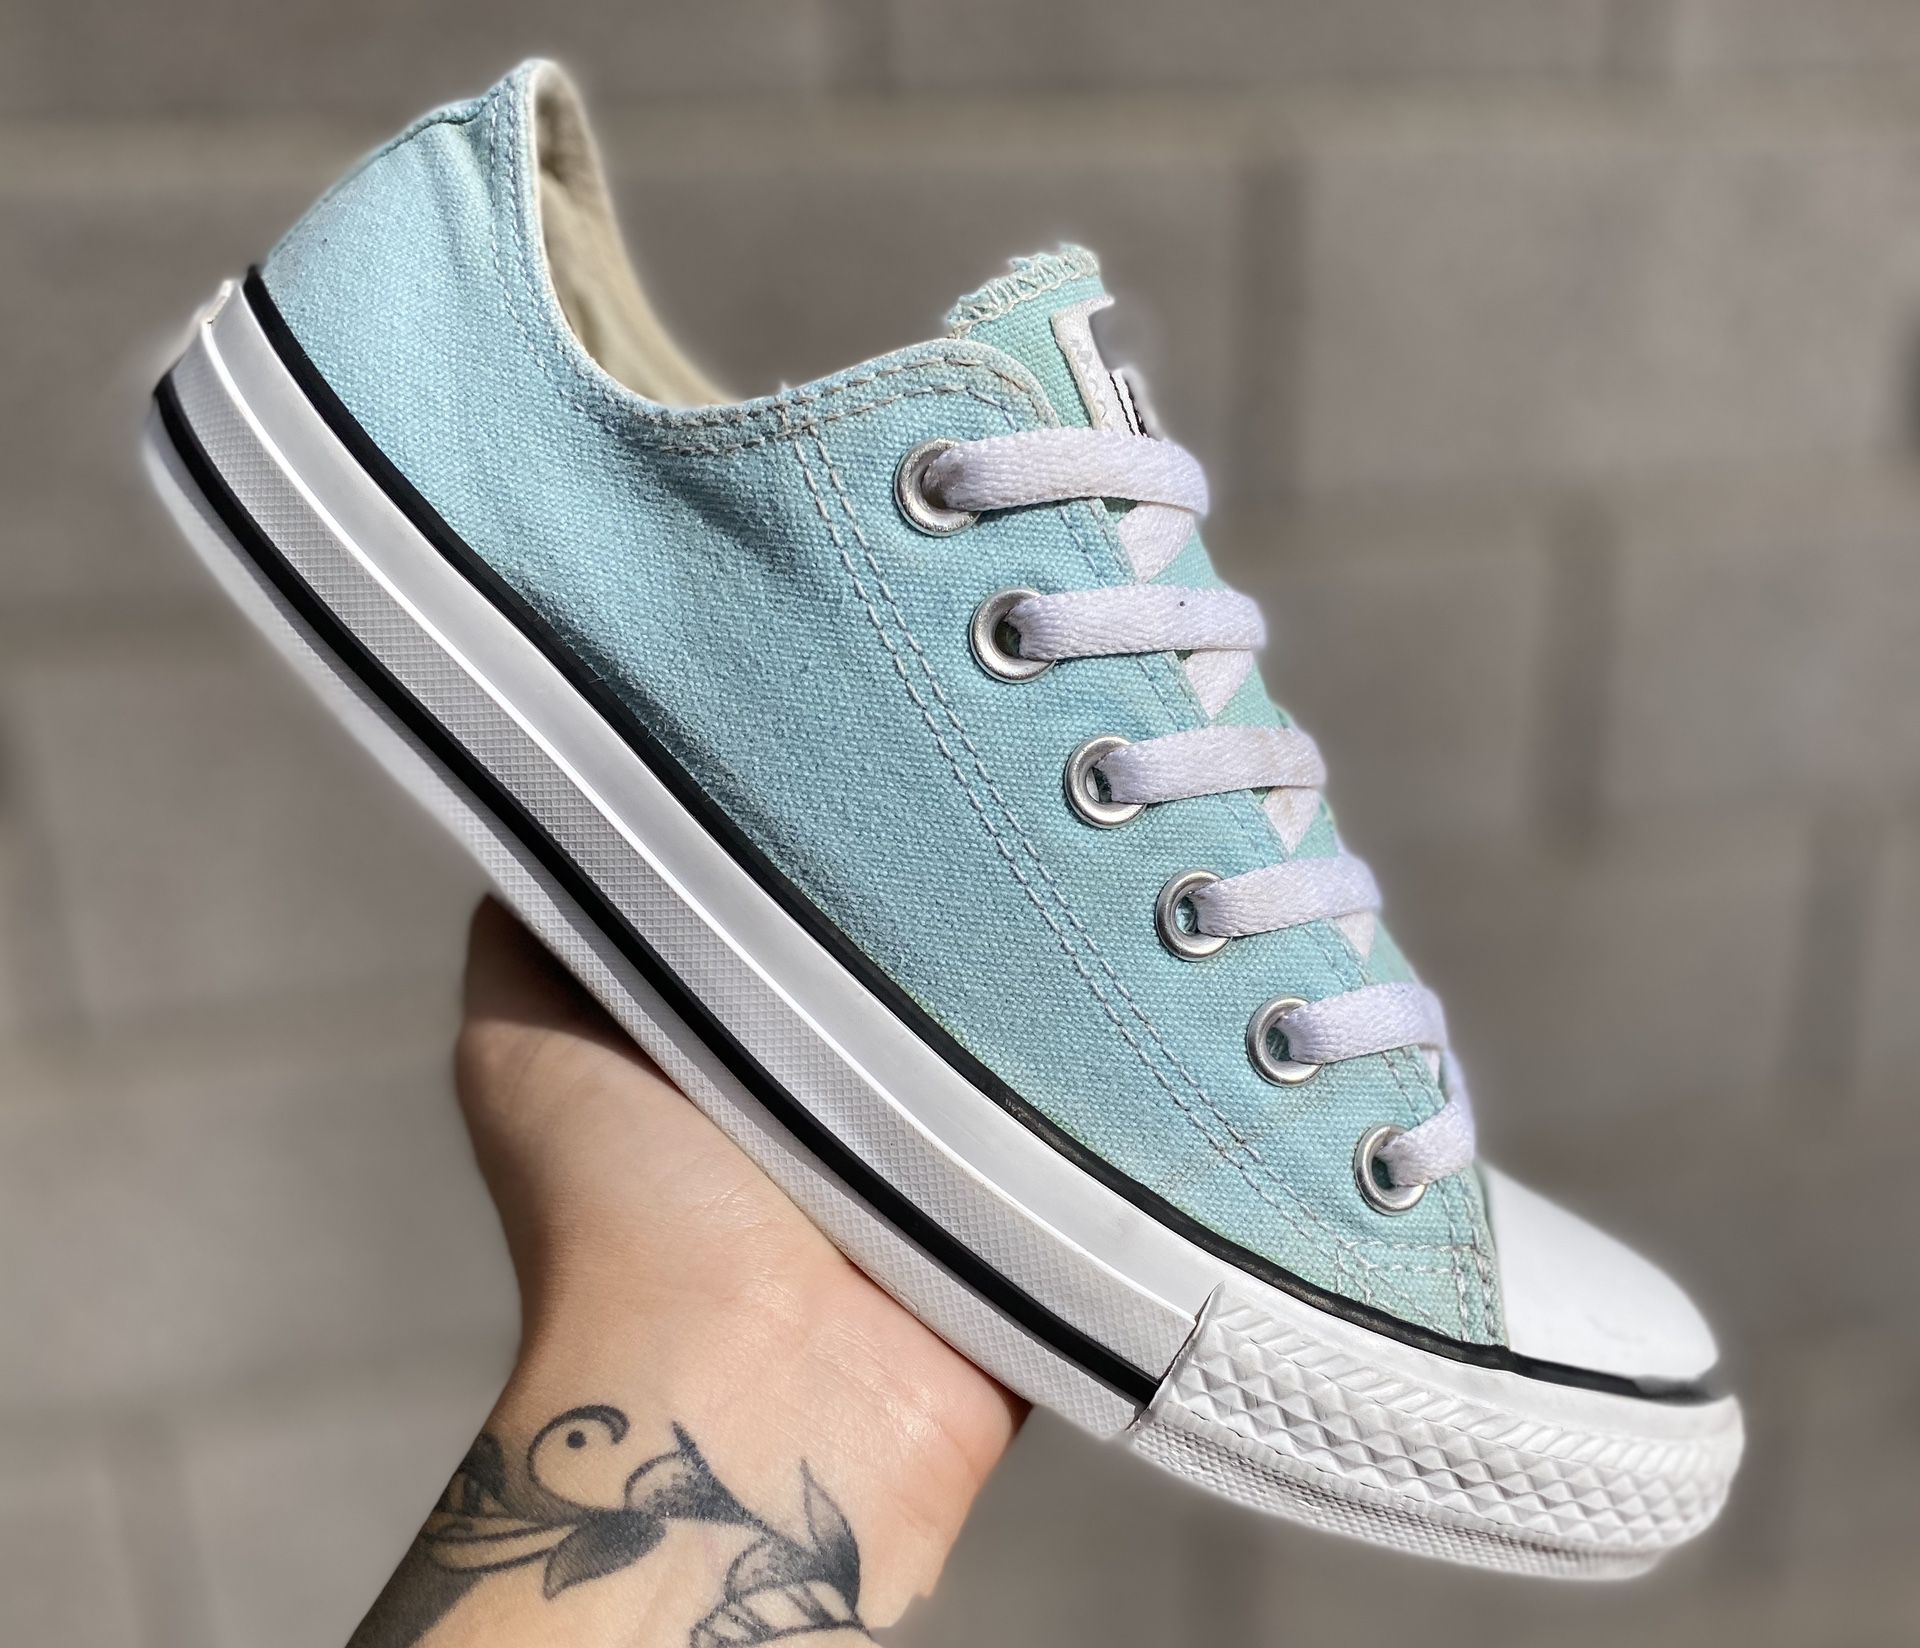 Converse Light Faded Blue Womens Casual Low Top Sneakers Shoes Sz 8